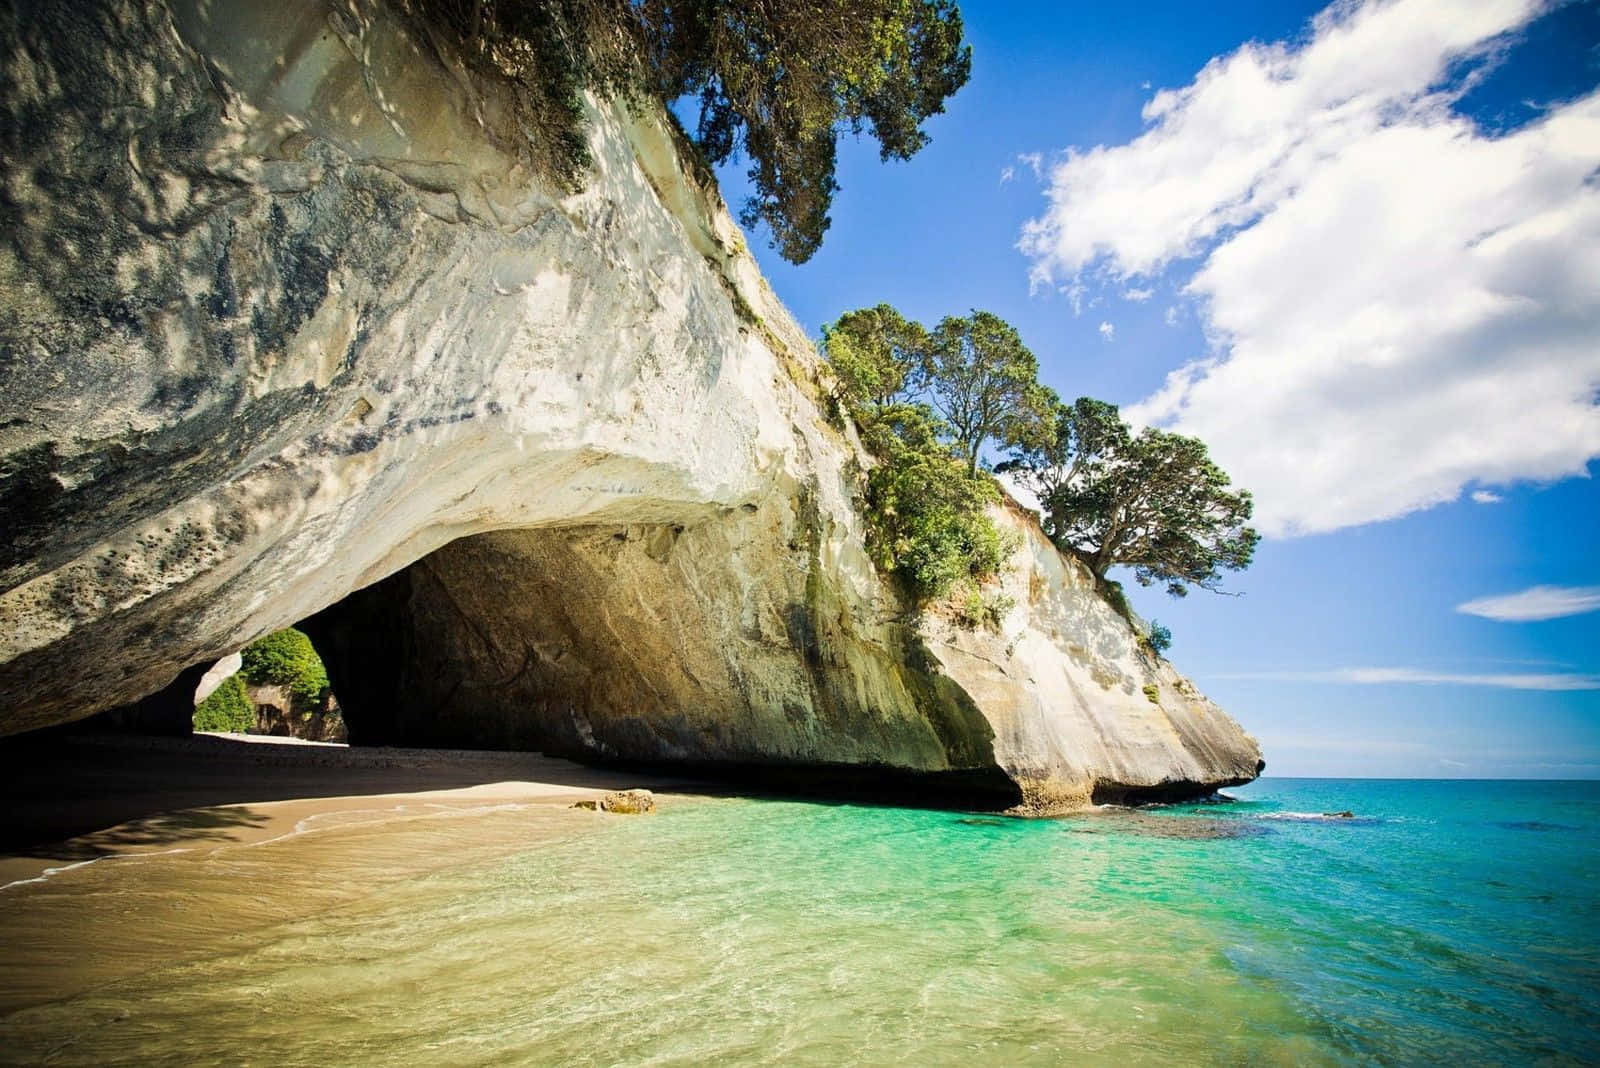 "Explore the Alluring Beauty of New Zealand"